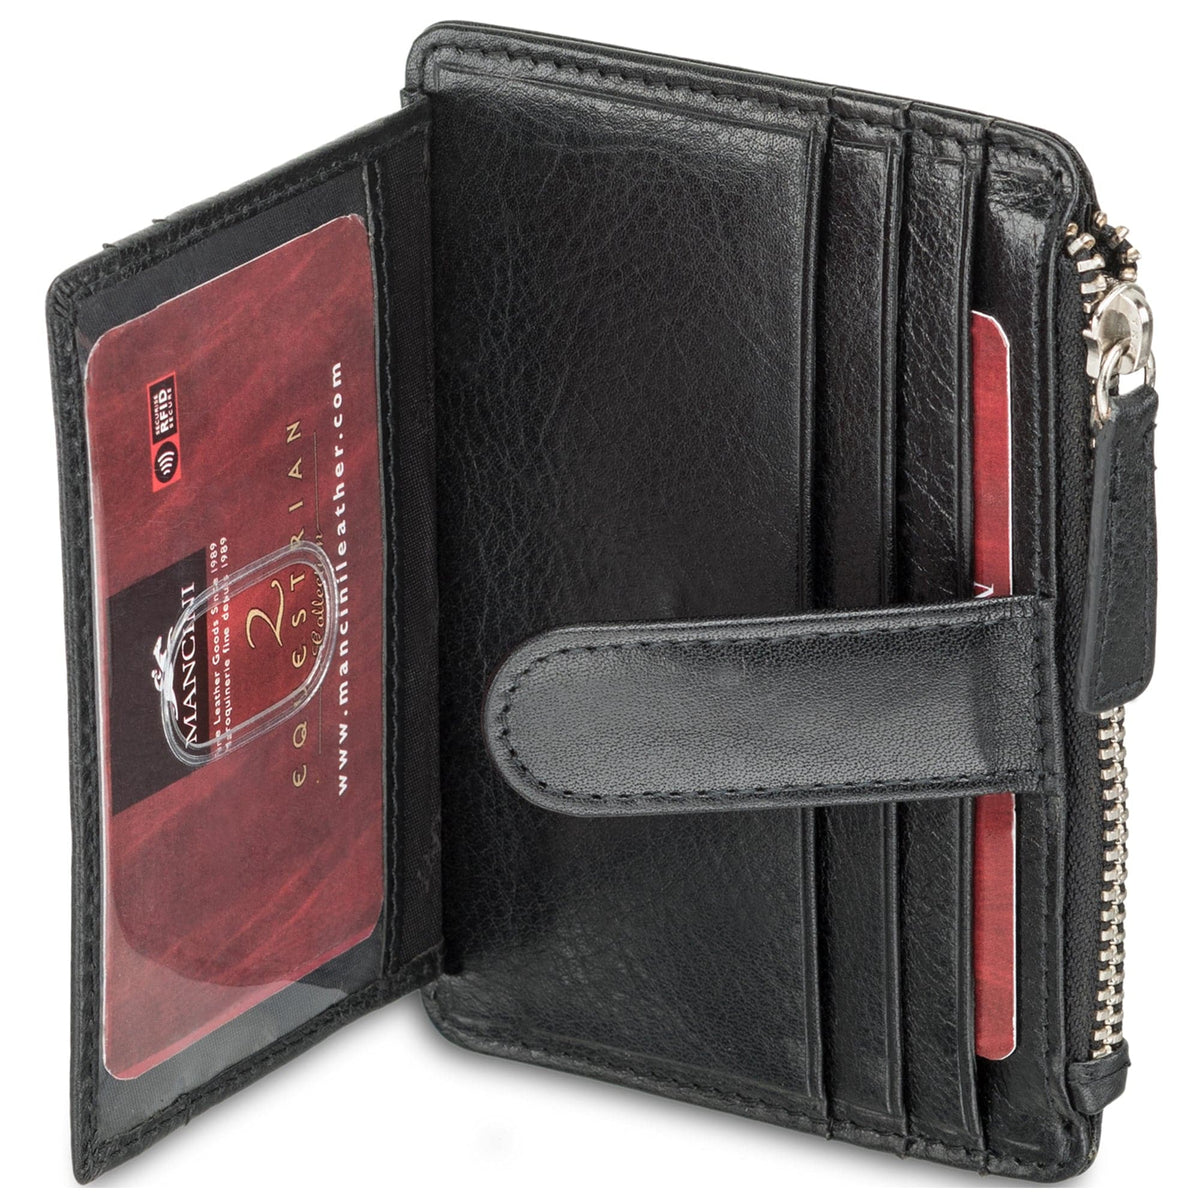 Mancini Equestrian-2 RFID Secure Card Case and Coin Pocket